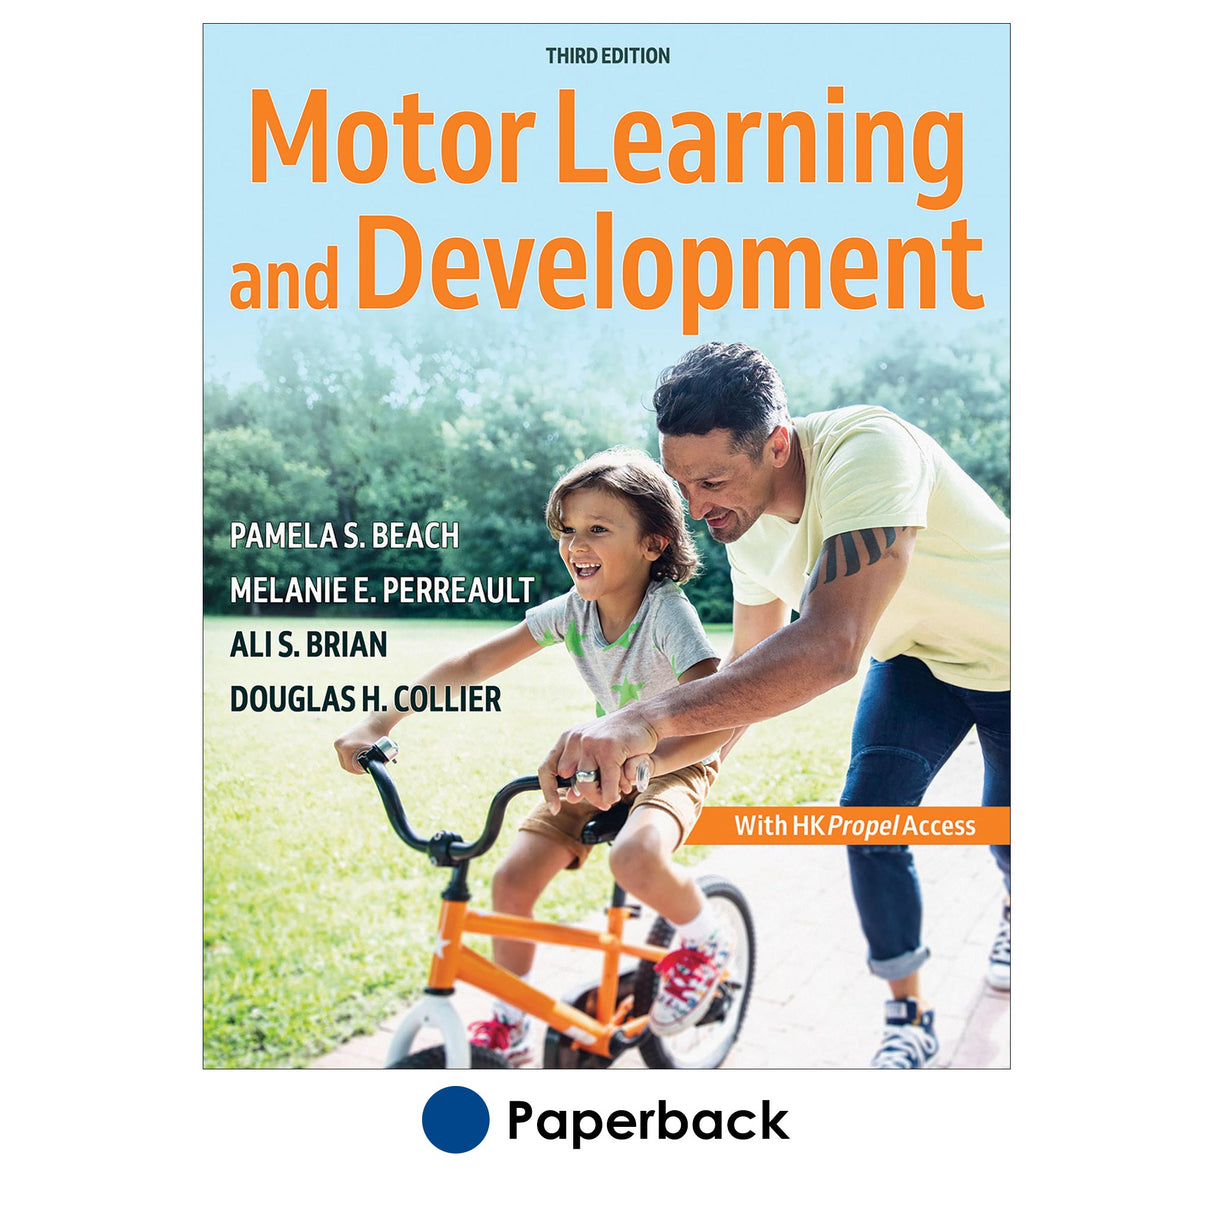 Motor Learning and Development-3rd Edition With HKPropel Access